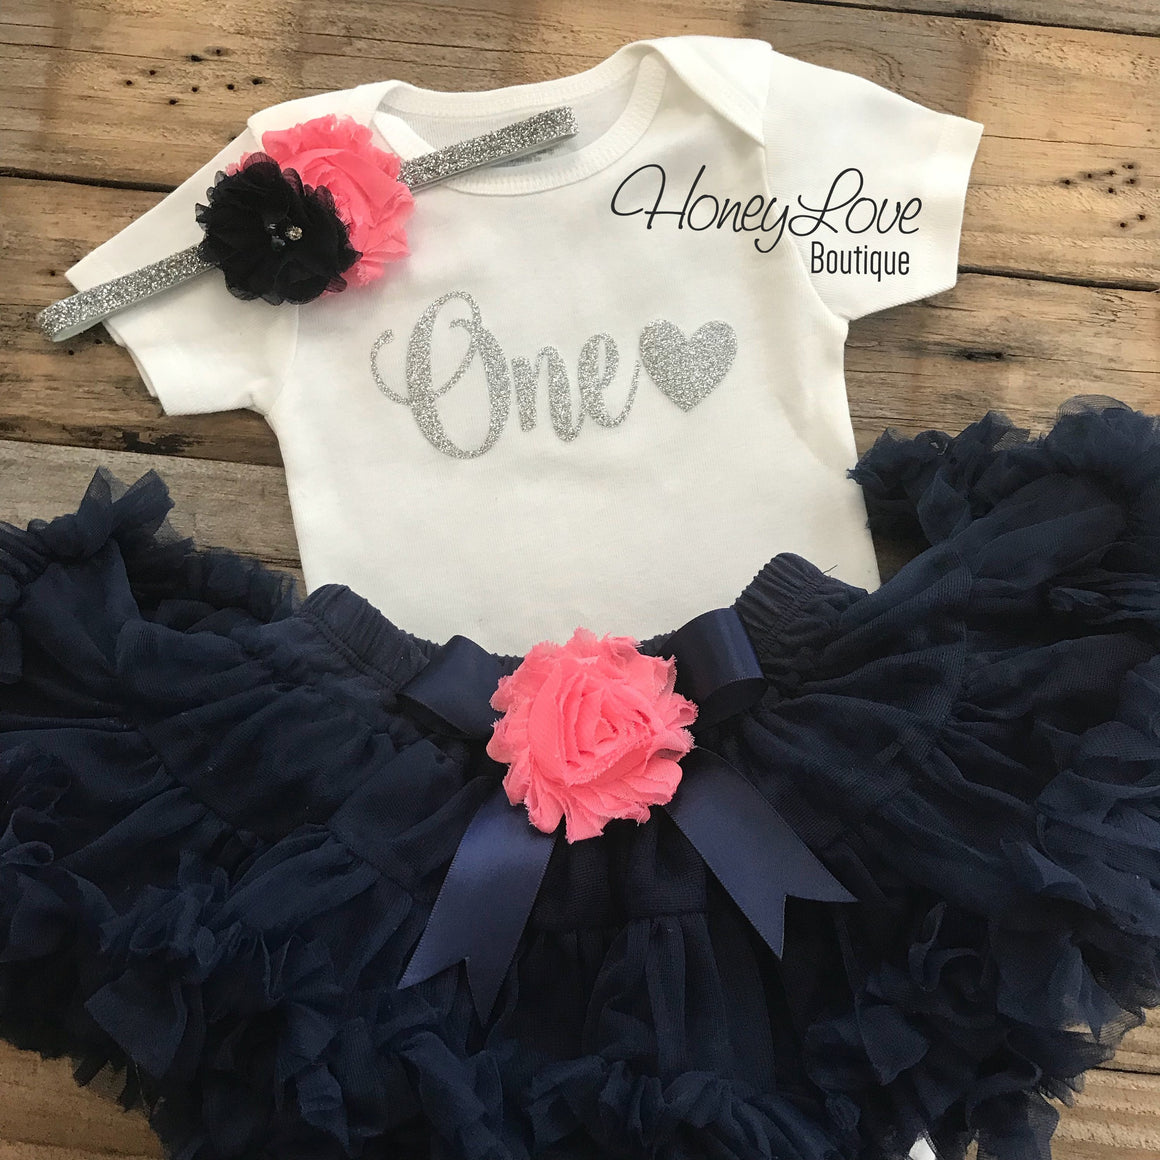 One with heart - Birthday Outfit - Navy Blue, Coral and Gold/Silver glitter - HoneyLoveBoutique